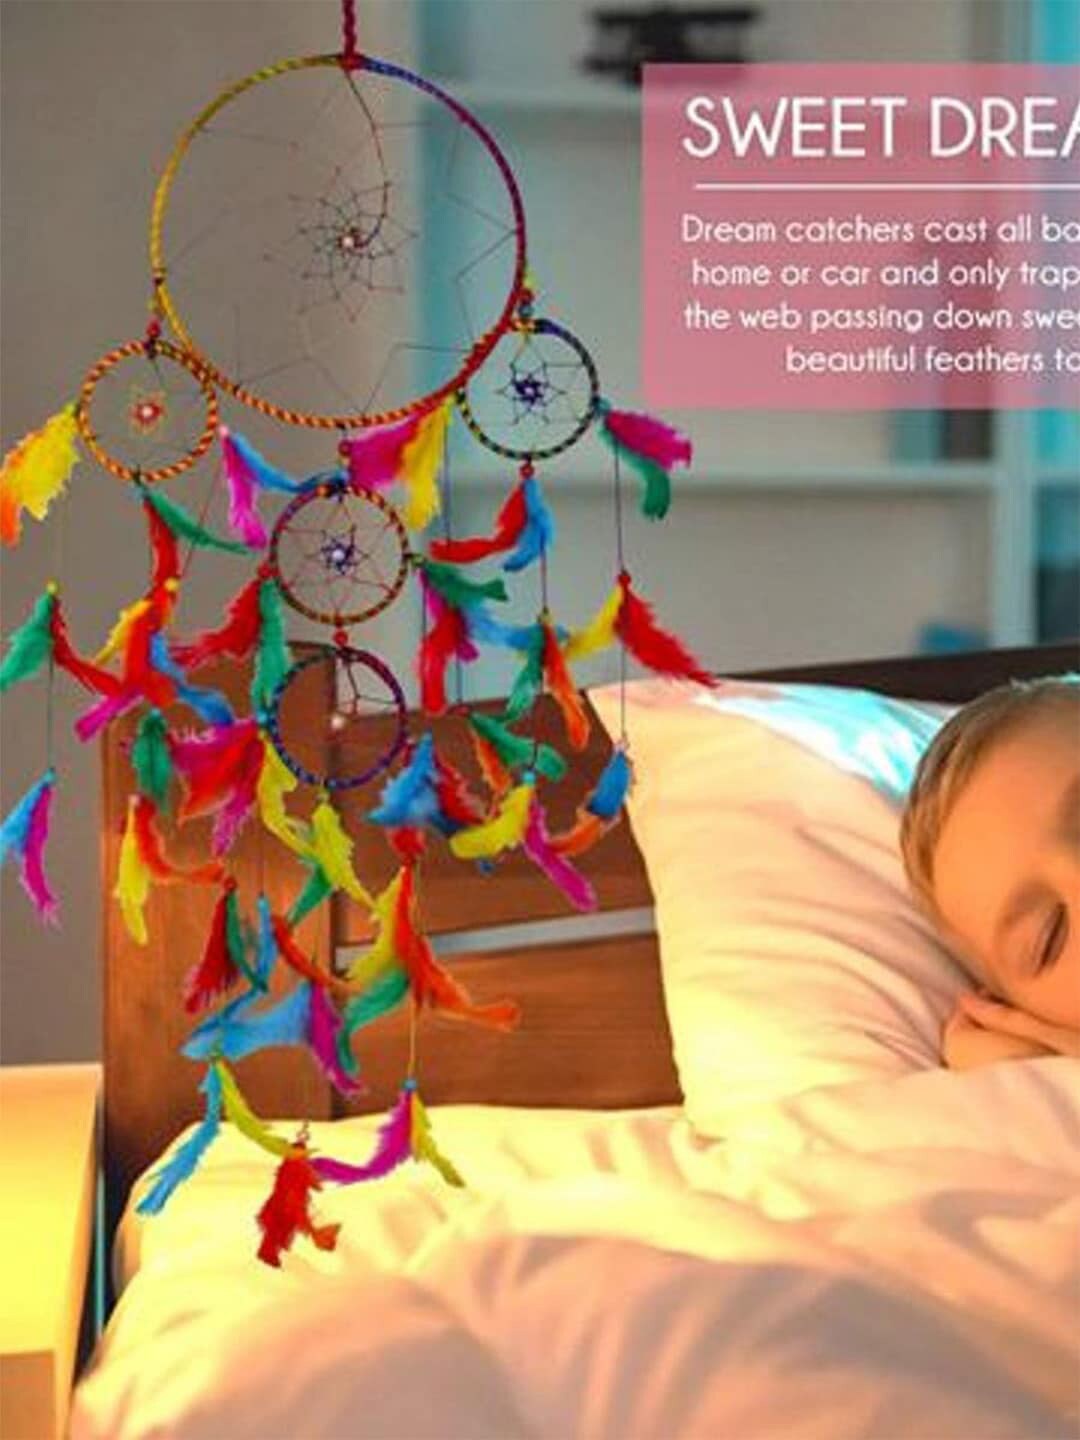 DULI Multi-Coloured Hanging with 5 Rings Dream Catcher Price in India